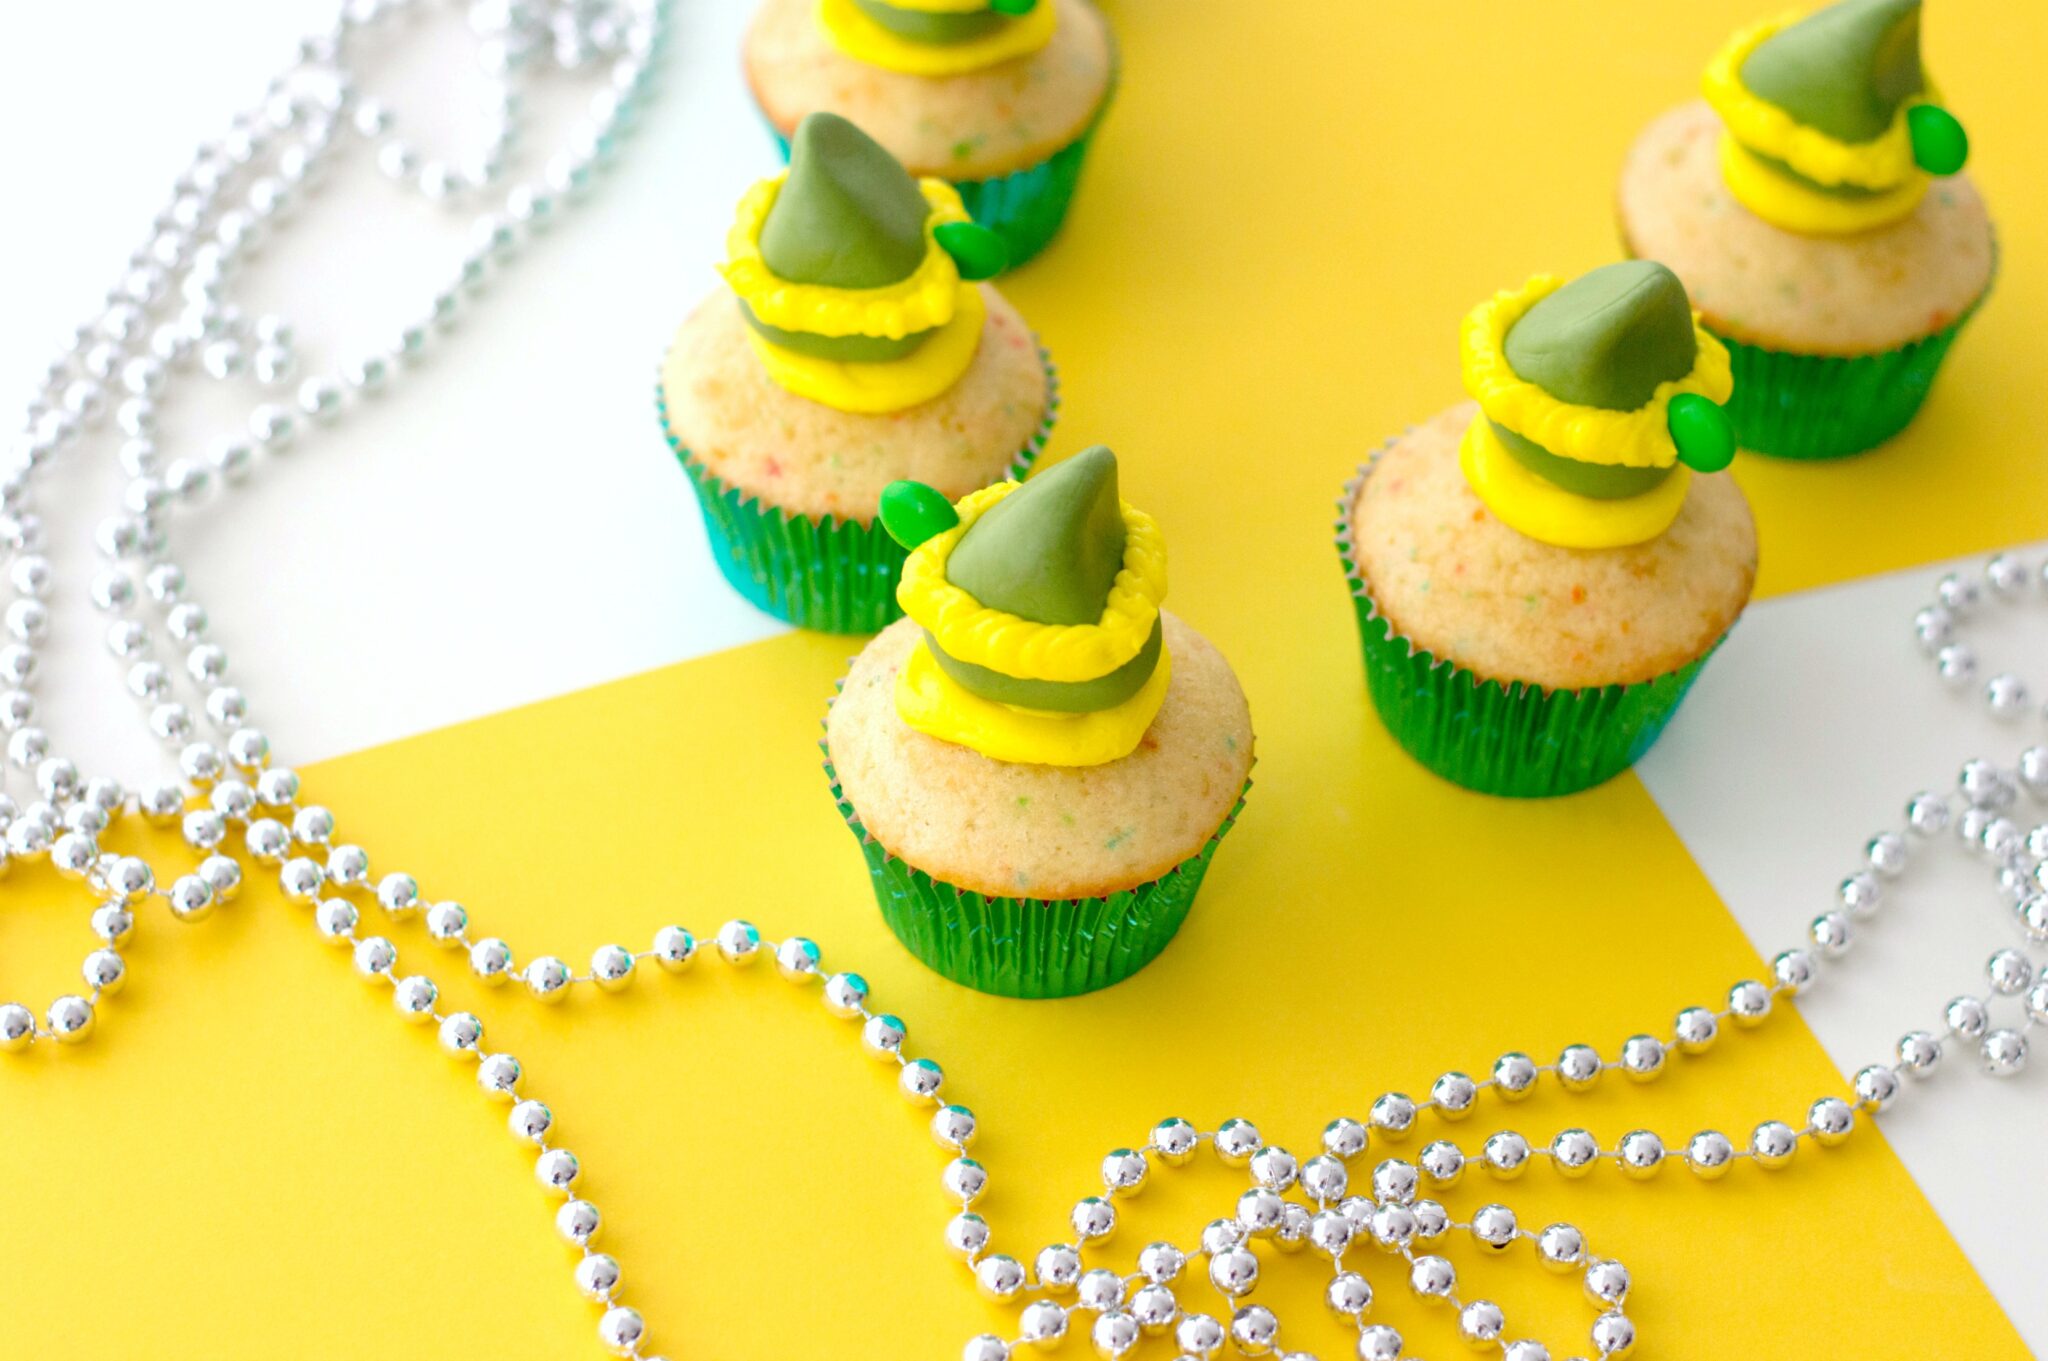 Final product with 5 Buddy the Elf cupcakes shown against a yellow and white background and silver bead garland. 